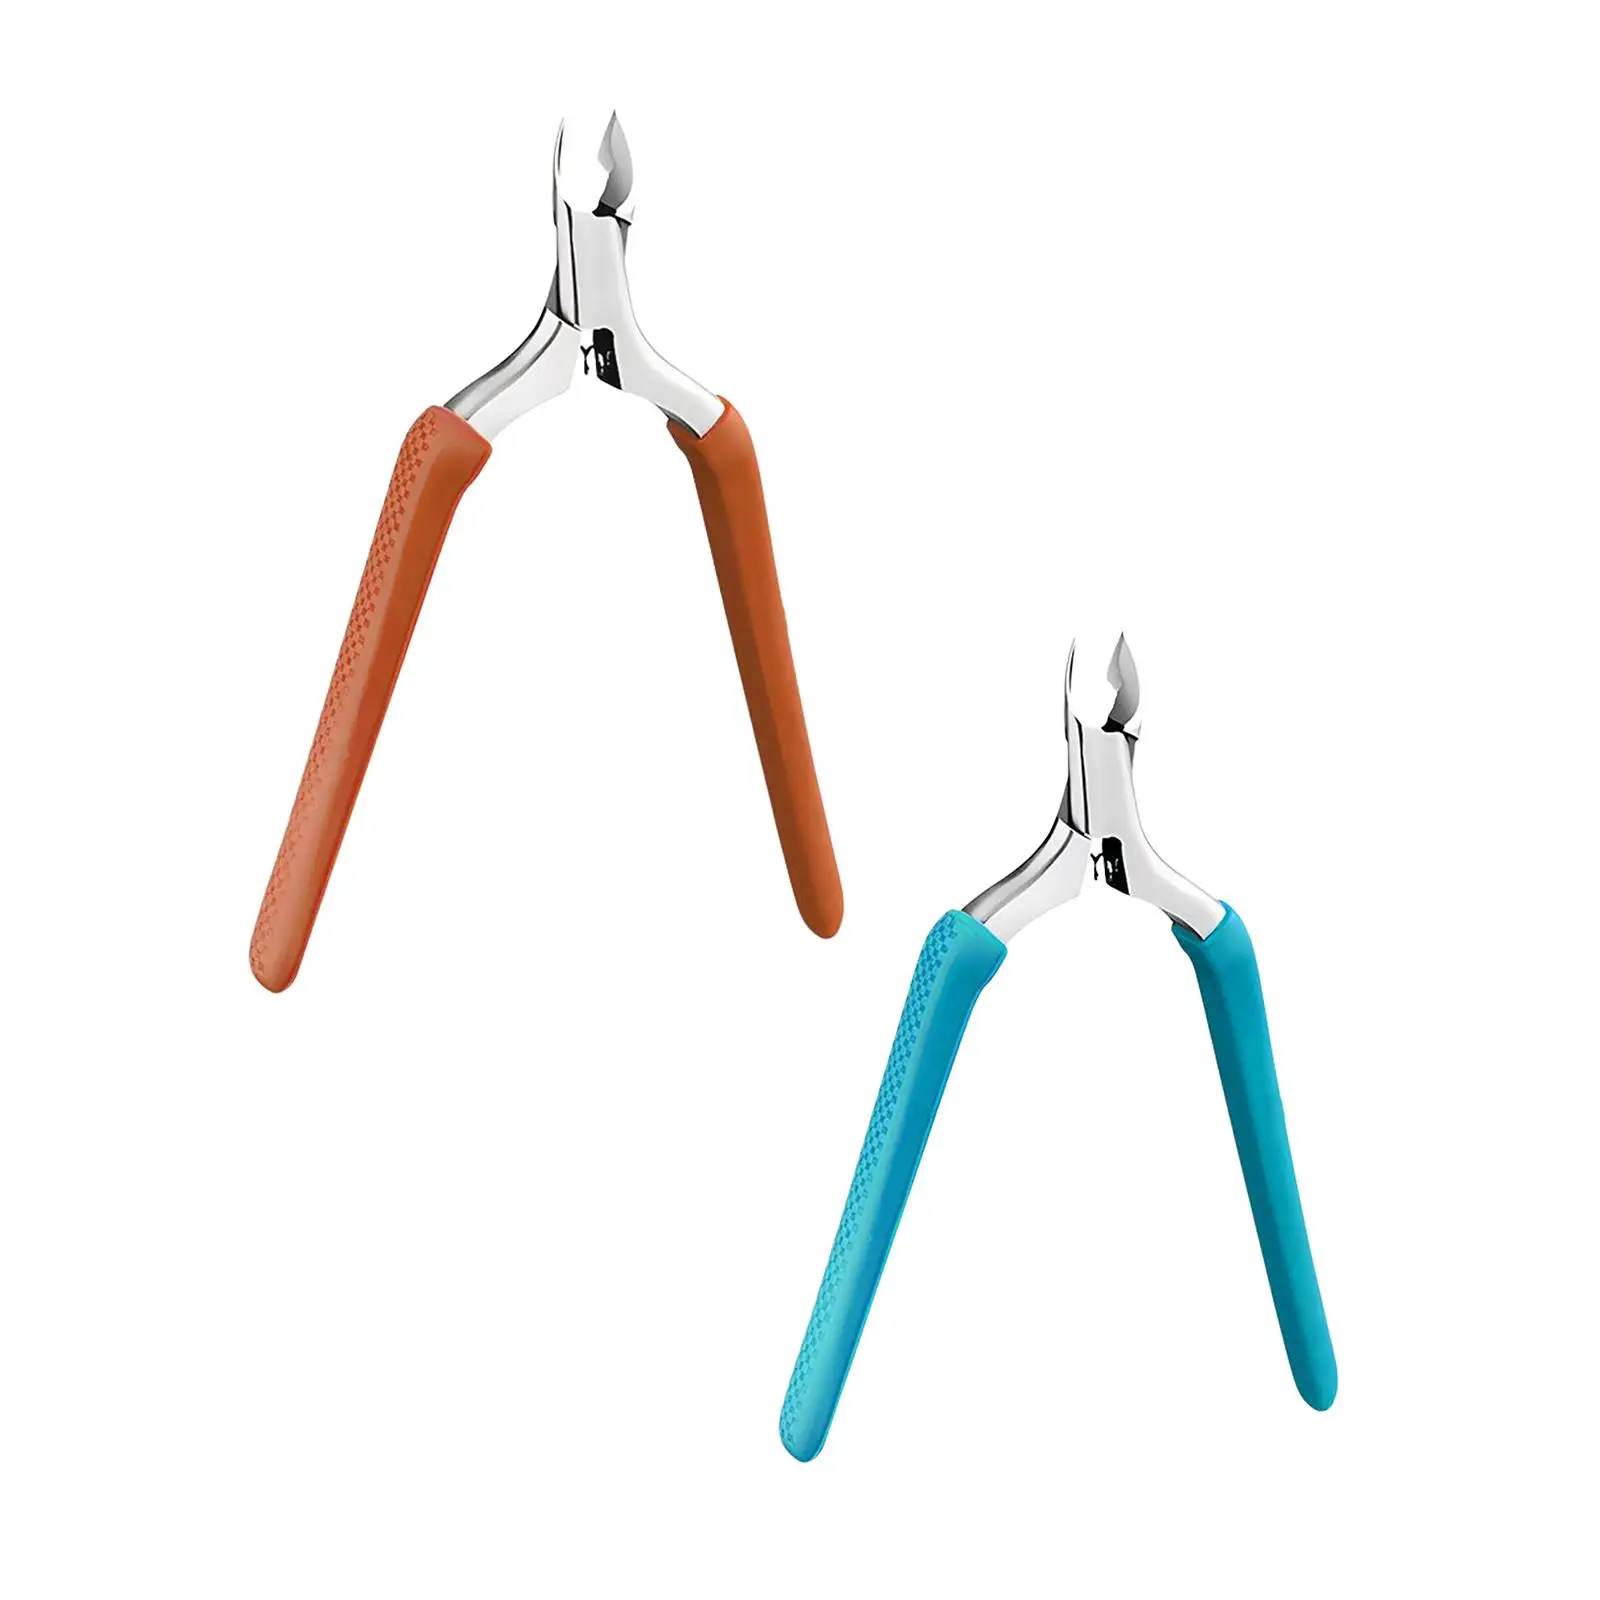 Cuticle Trimmer Nail Dry Skin Remover Strong Cuticle Care Nail Scissors Cuticle Nipper Cuticle Clipper for Manicure and Pedicure